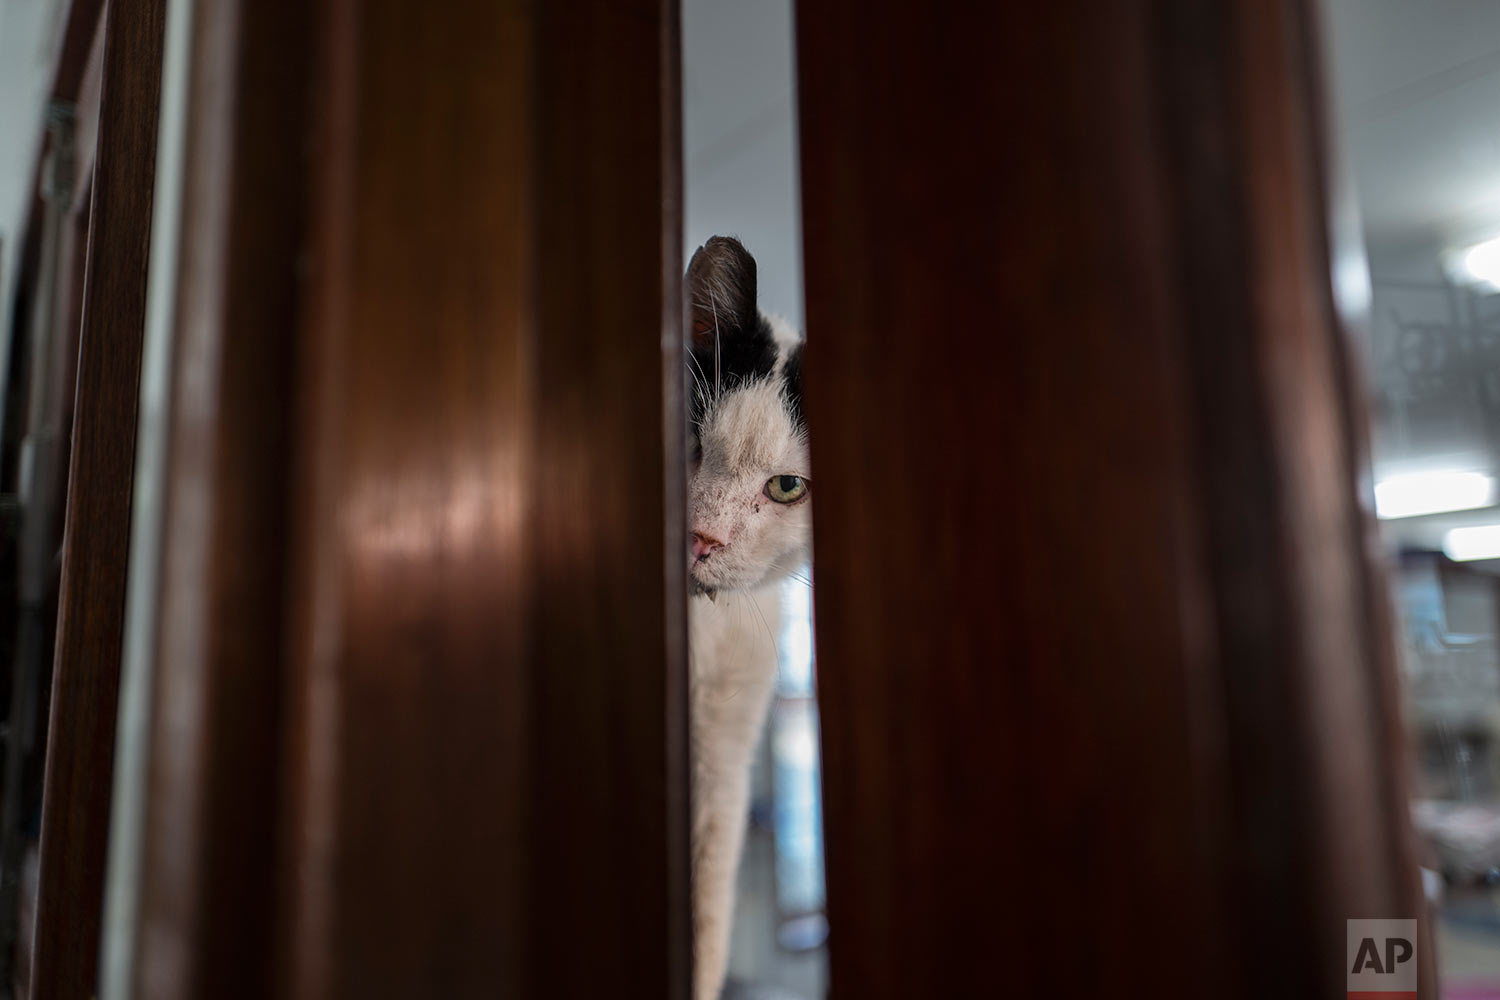  In this Wednesday, Aug. 2, 2017 photo, Koeienkat, a 10-year-old cat peeks through the a door at the Catboat shelter in Amsterdam, Netherlands. (AP Photo/Muhammed Muheisen) 